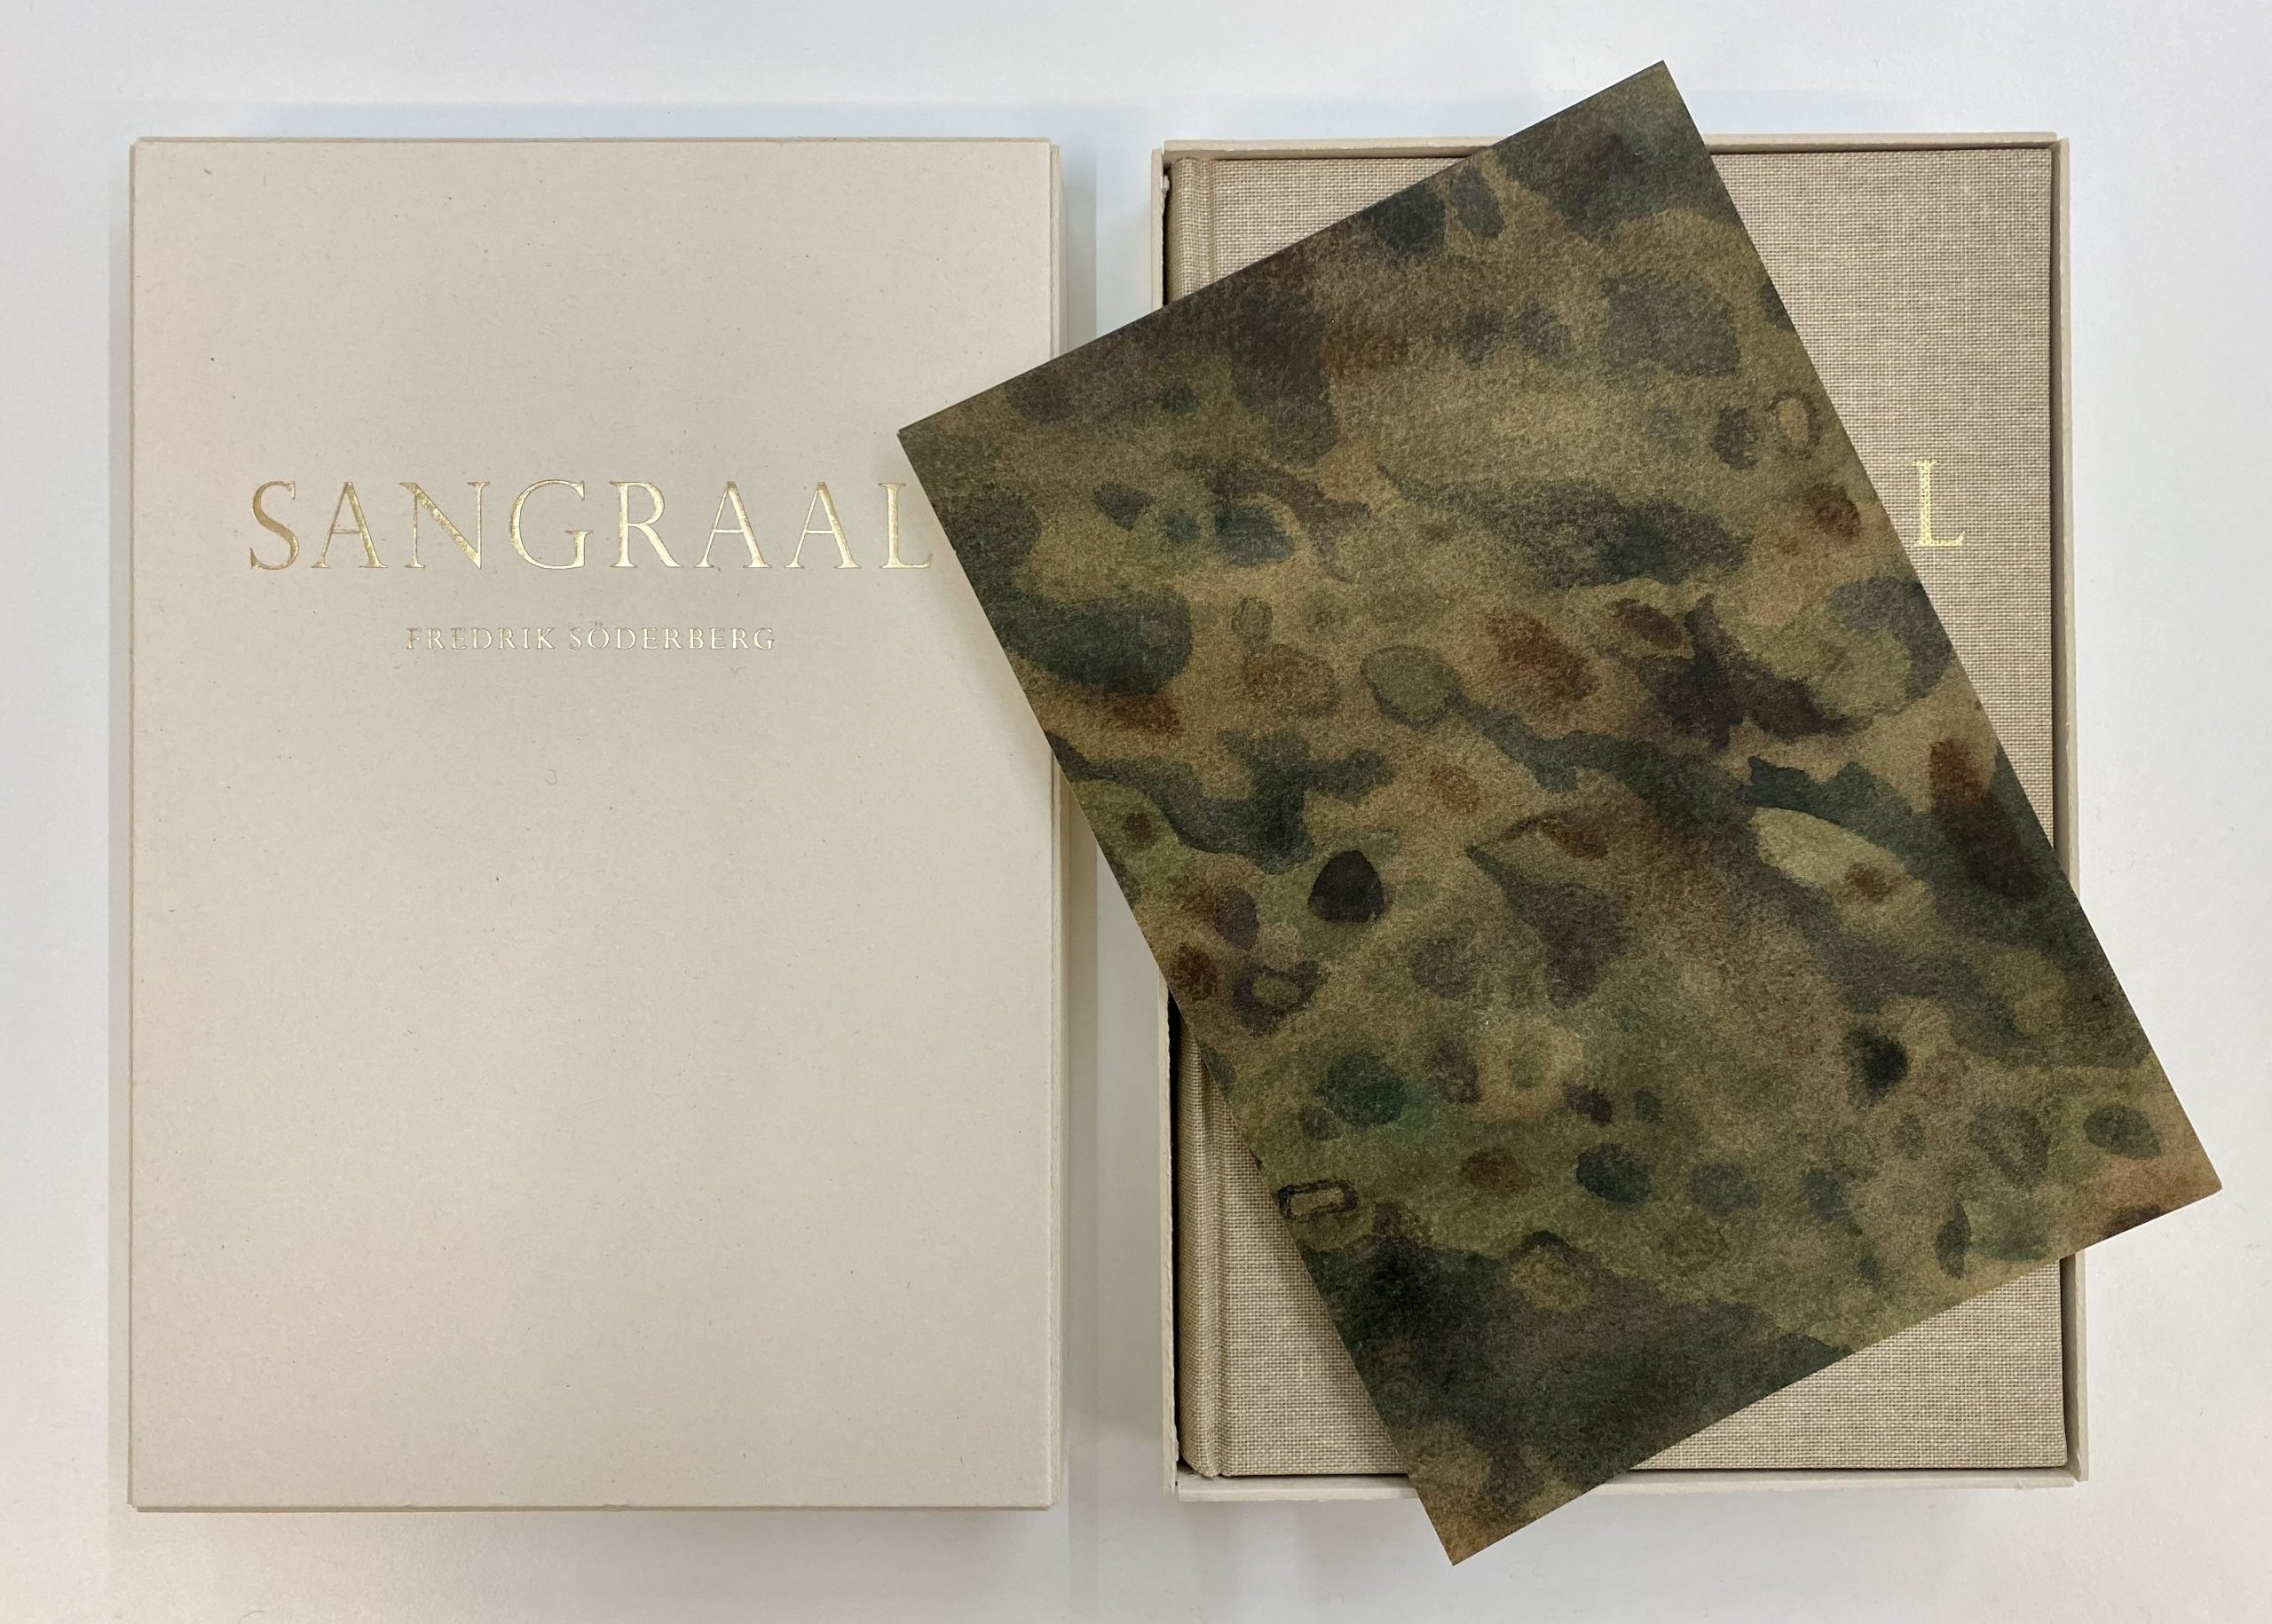 Fredrik Söderberg, Sangraal, 2022, deluxe edition of book with unique watercolour painting, edition of 25, 22 x 15 cm